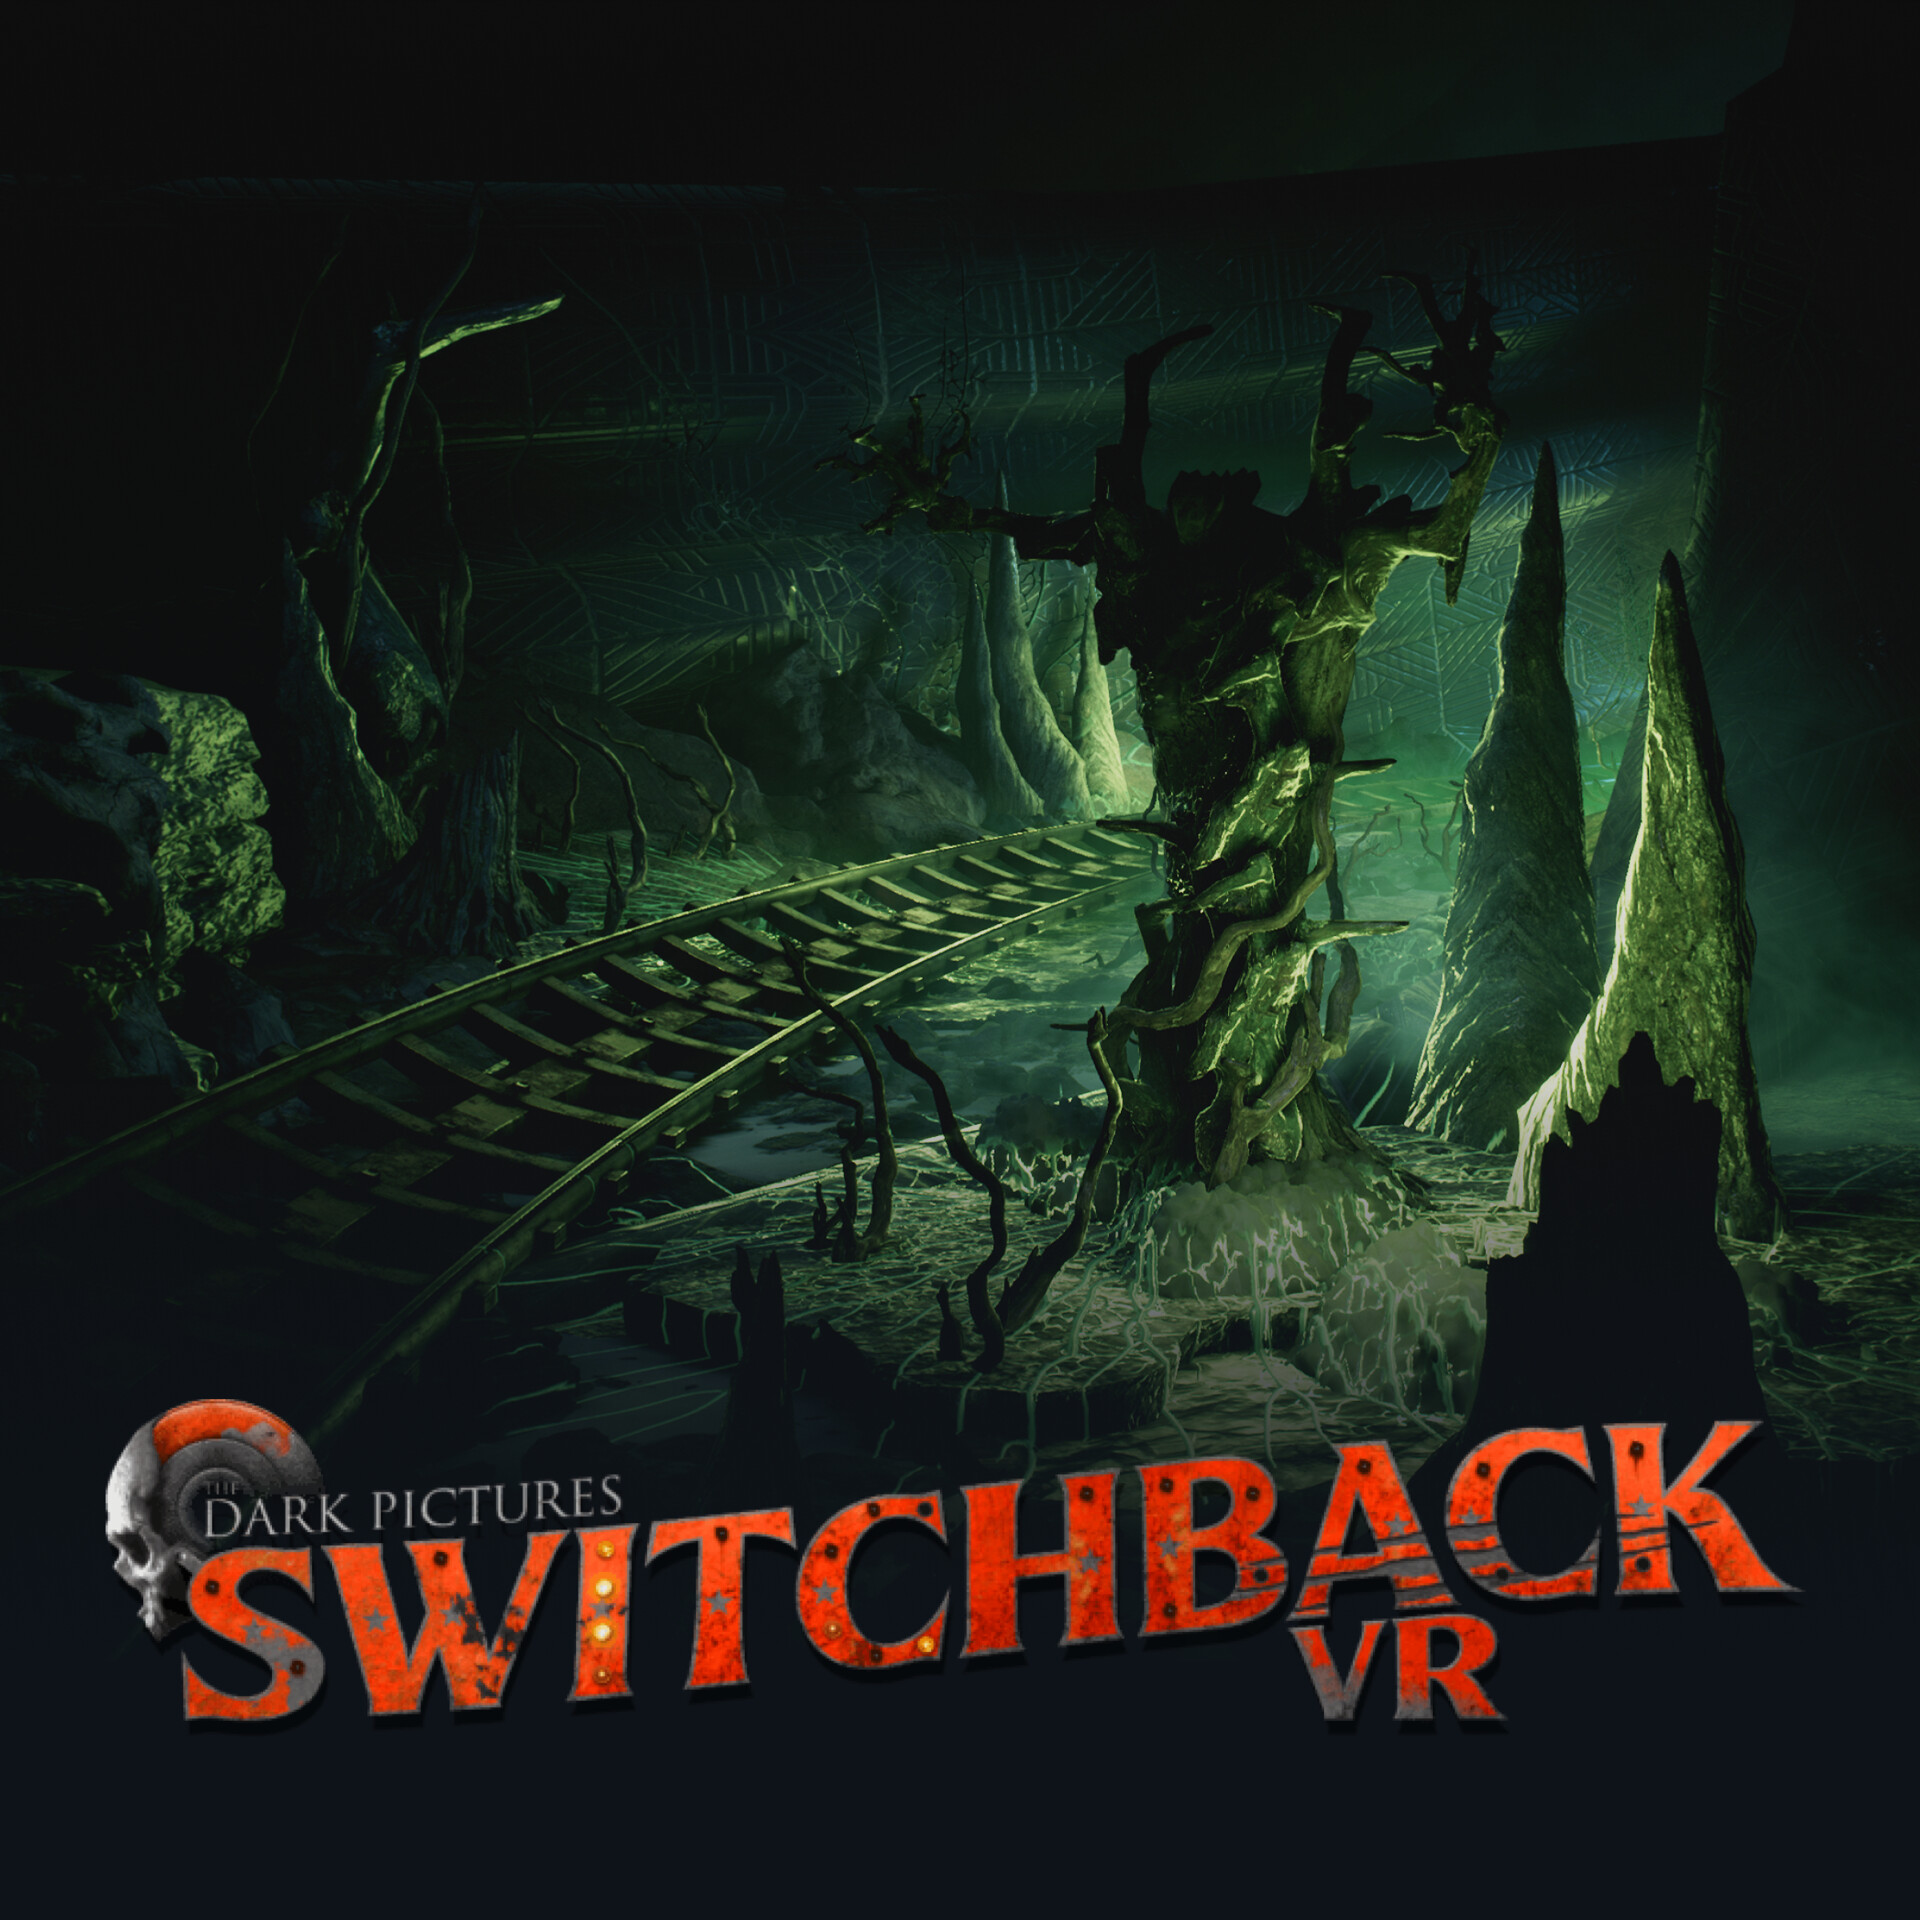 The Dark Pictures: Switchback VR - PS VR2 Games